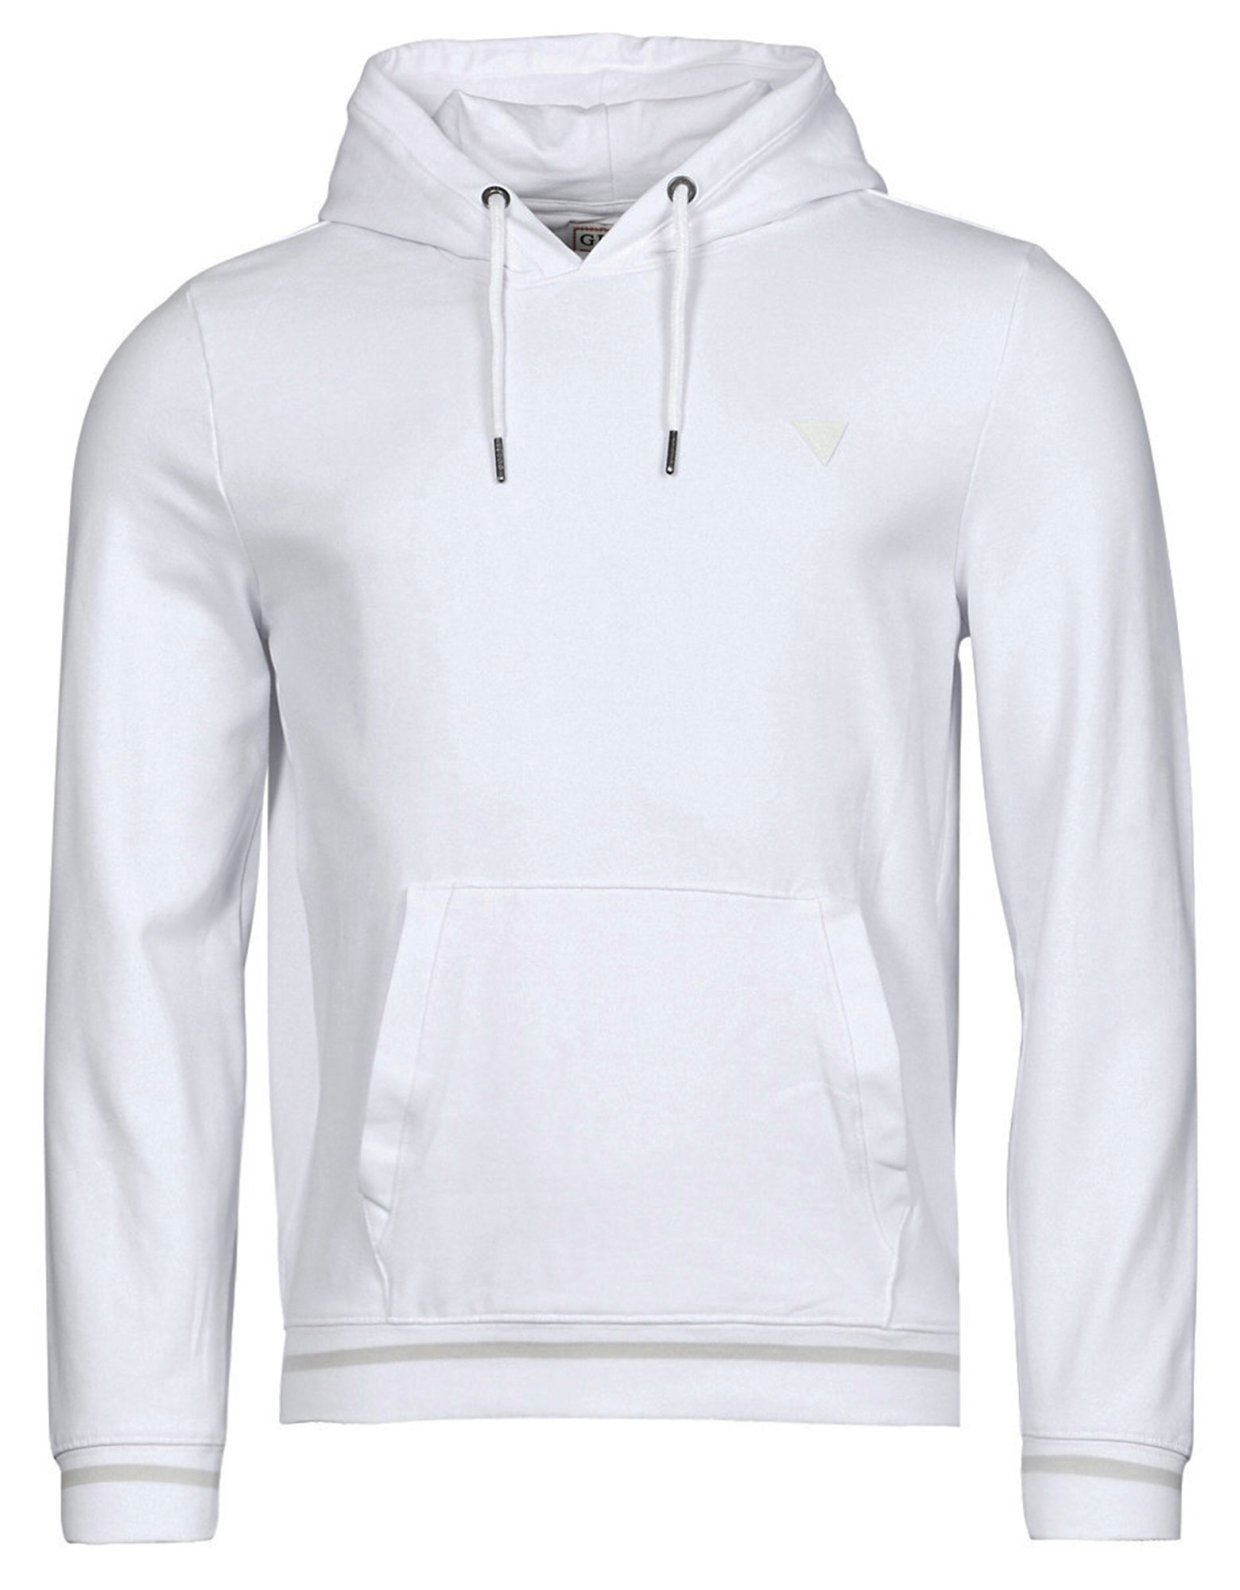 Guess Christian hoody white